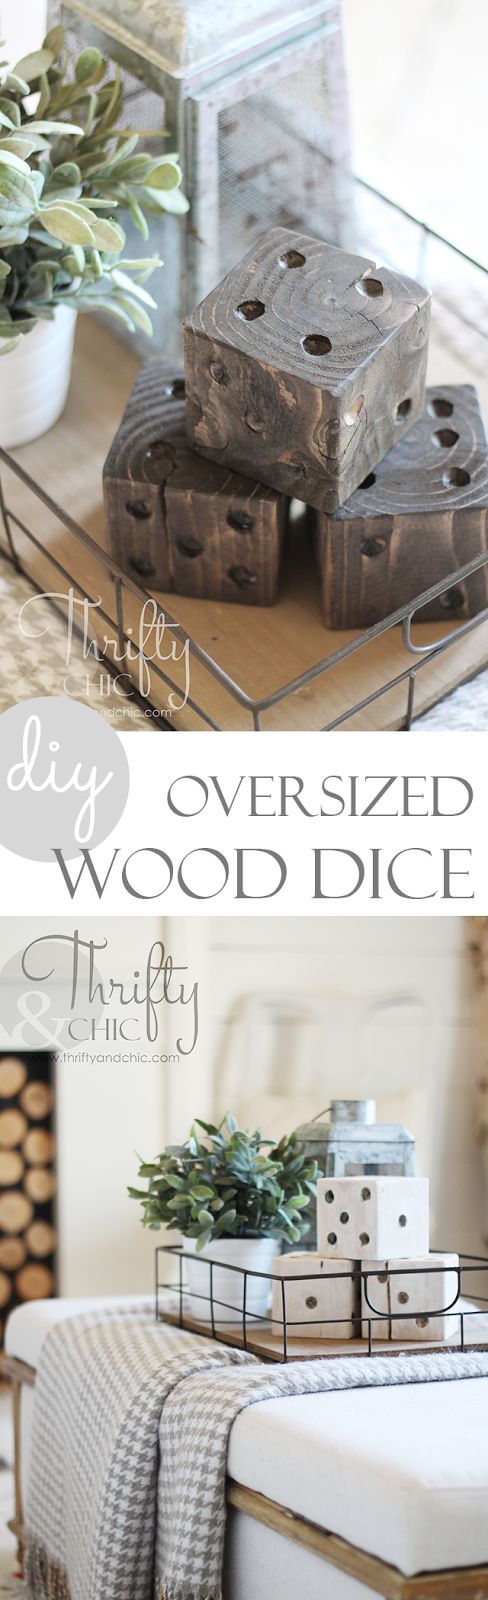 DIY oversized wood dice. A great way to add rustic farmhouse charm to your house...